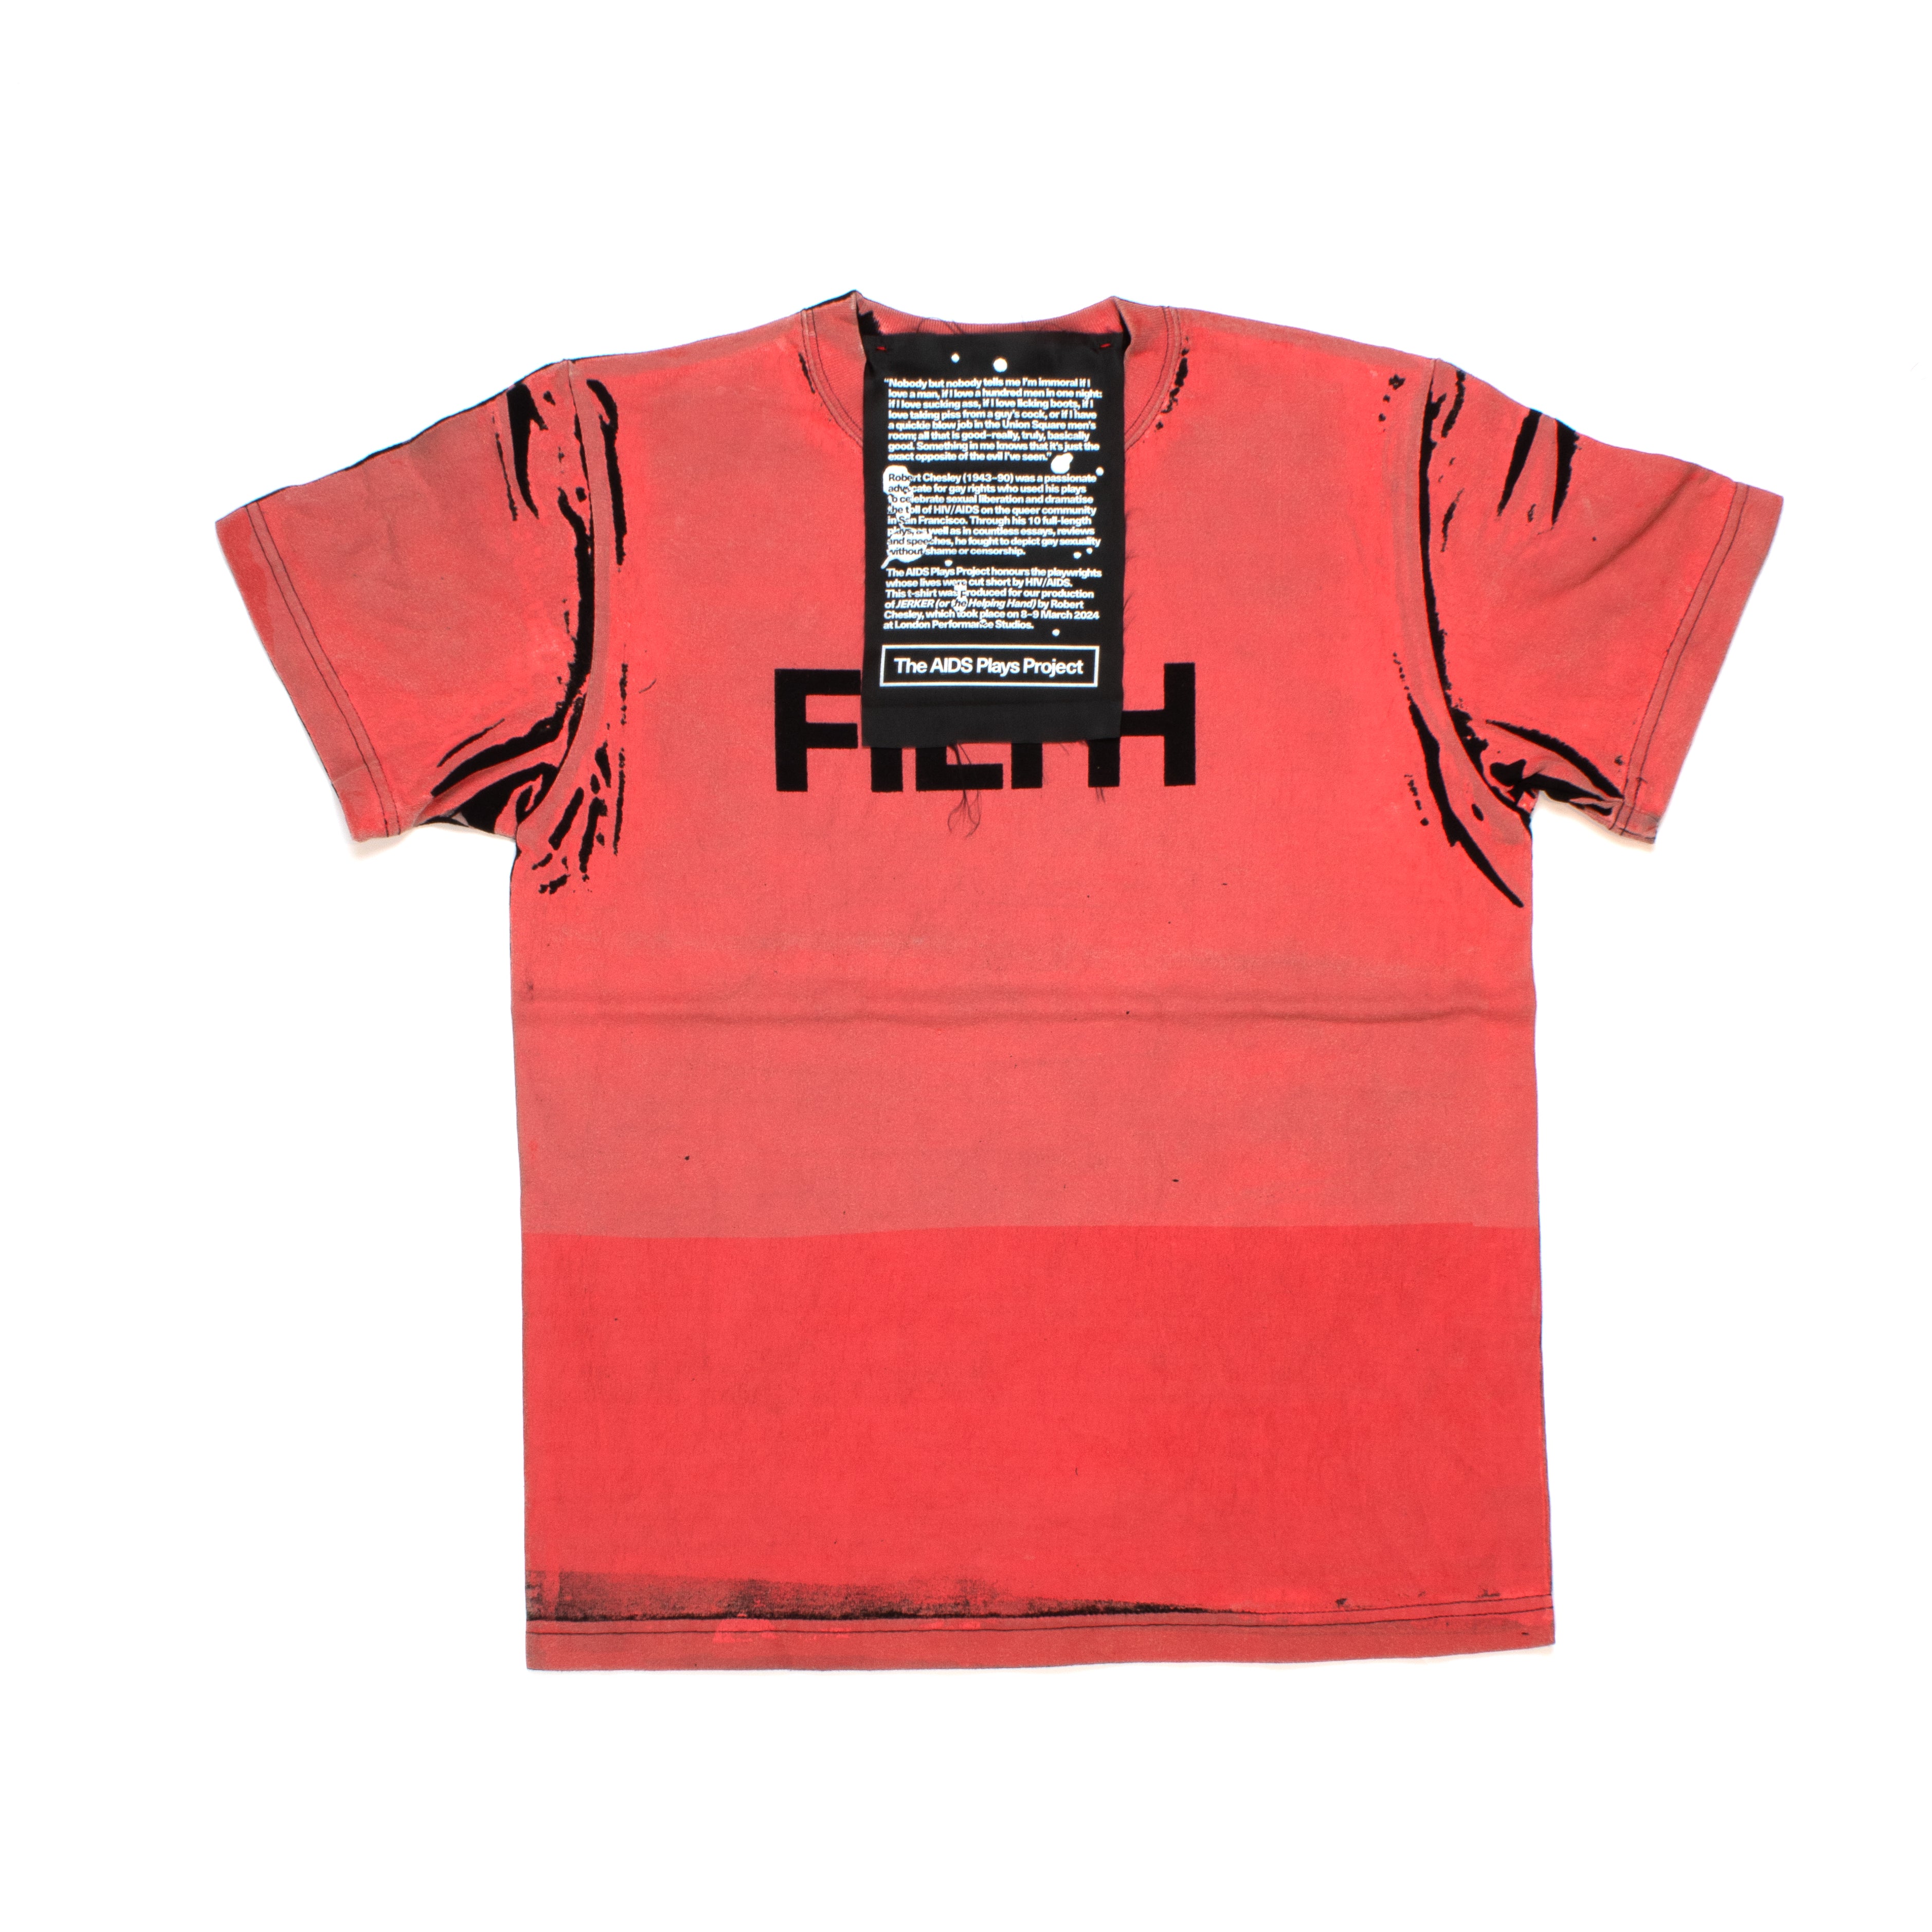 FILTH Red Printed Tee - 2 x 2